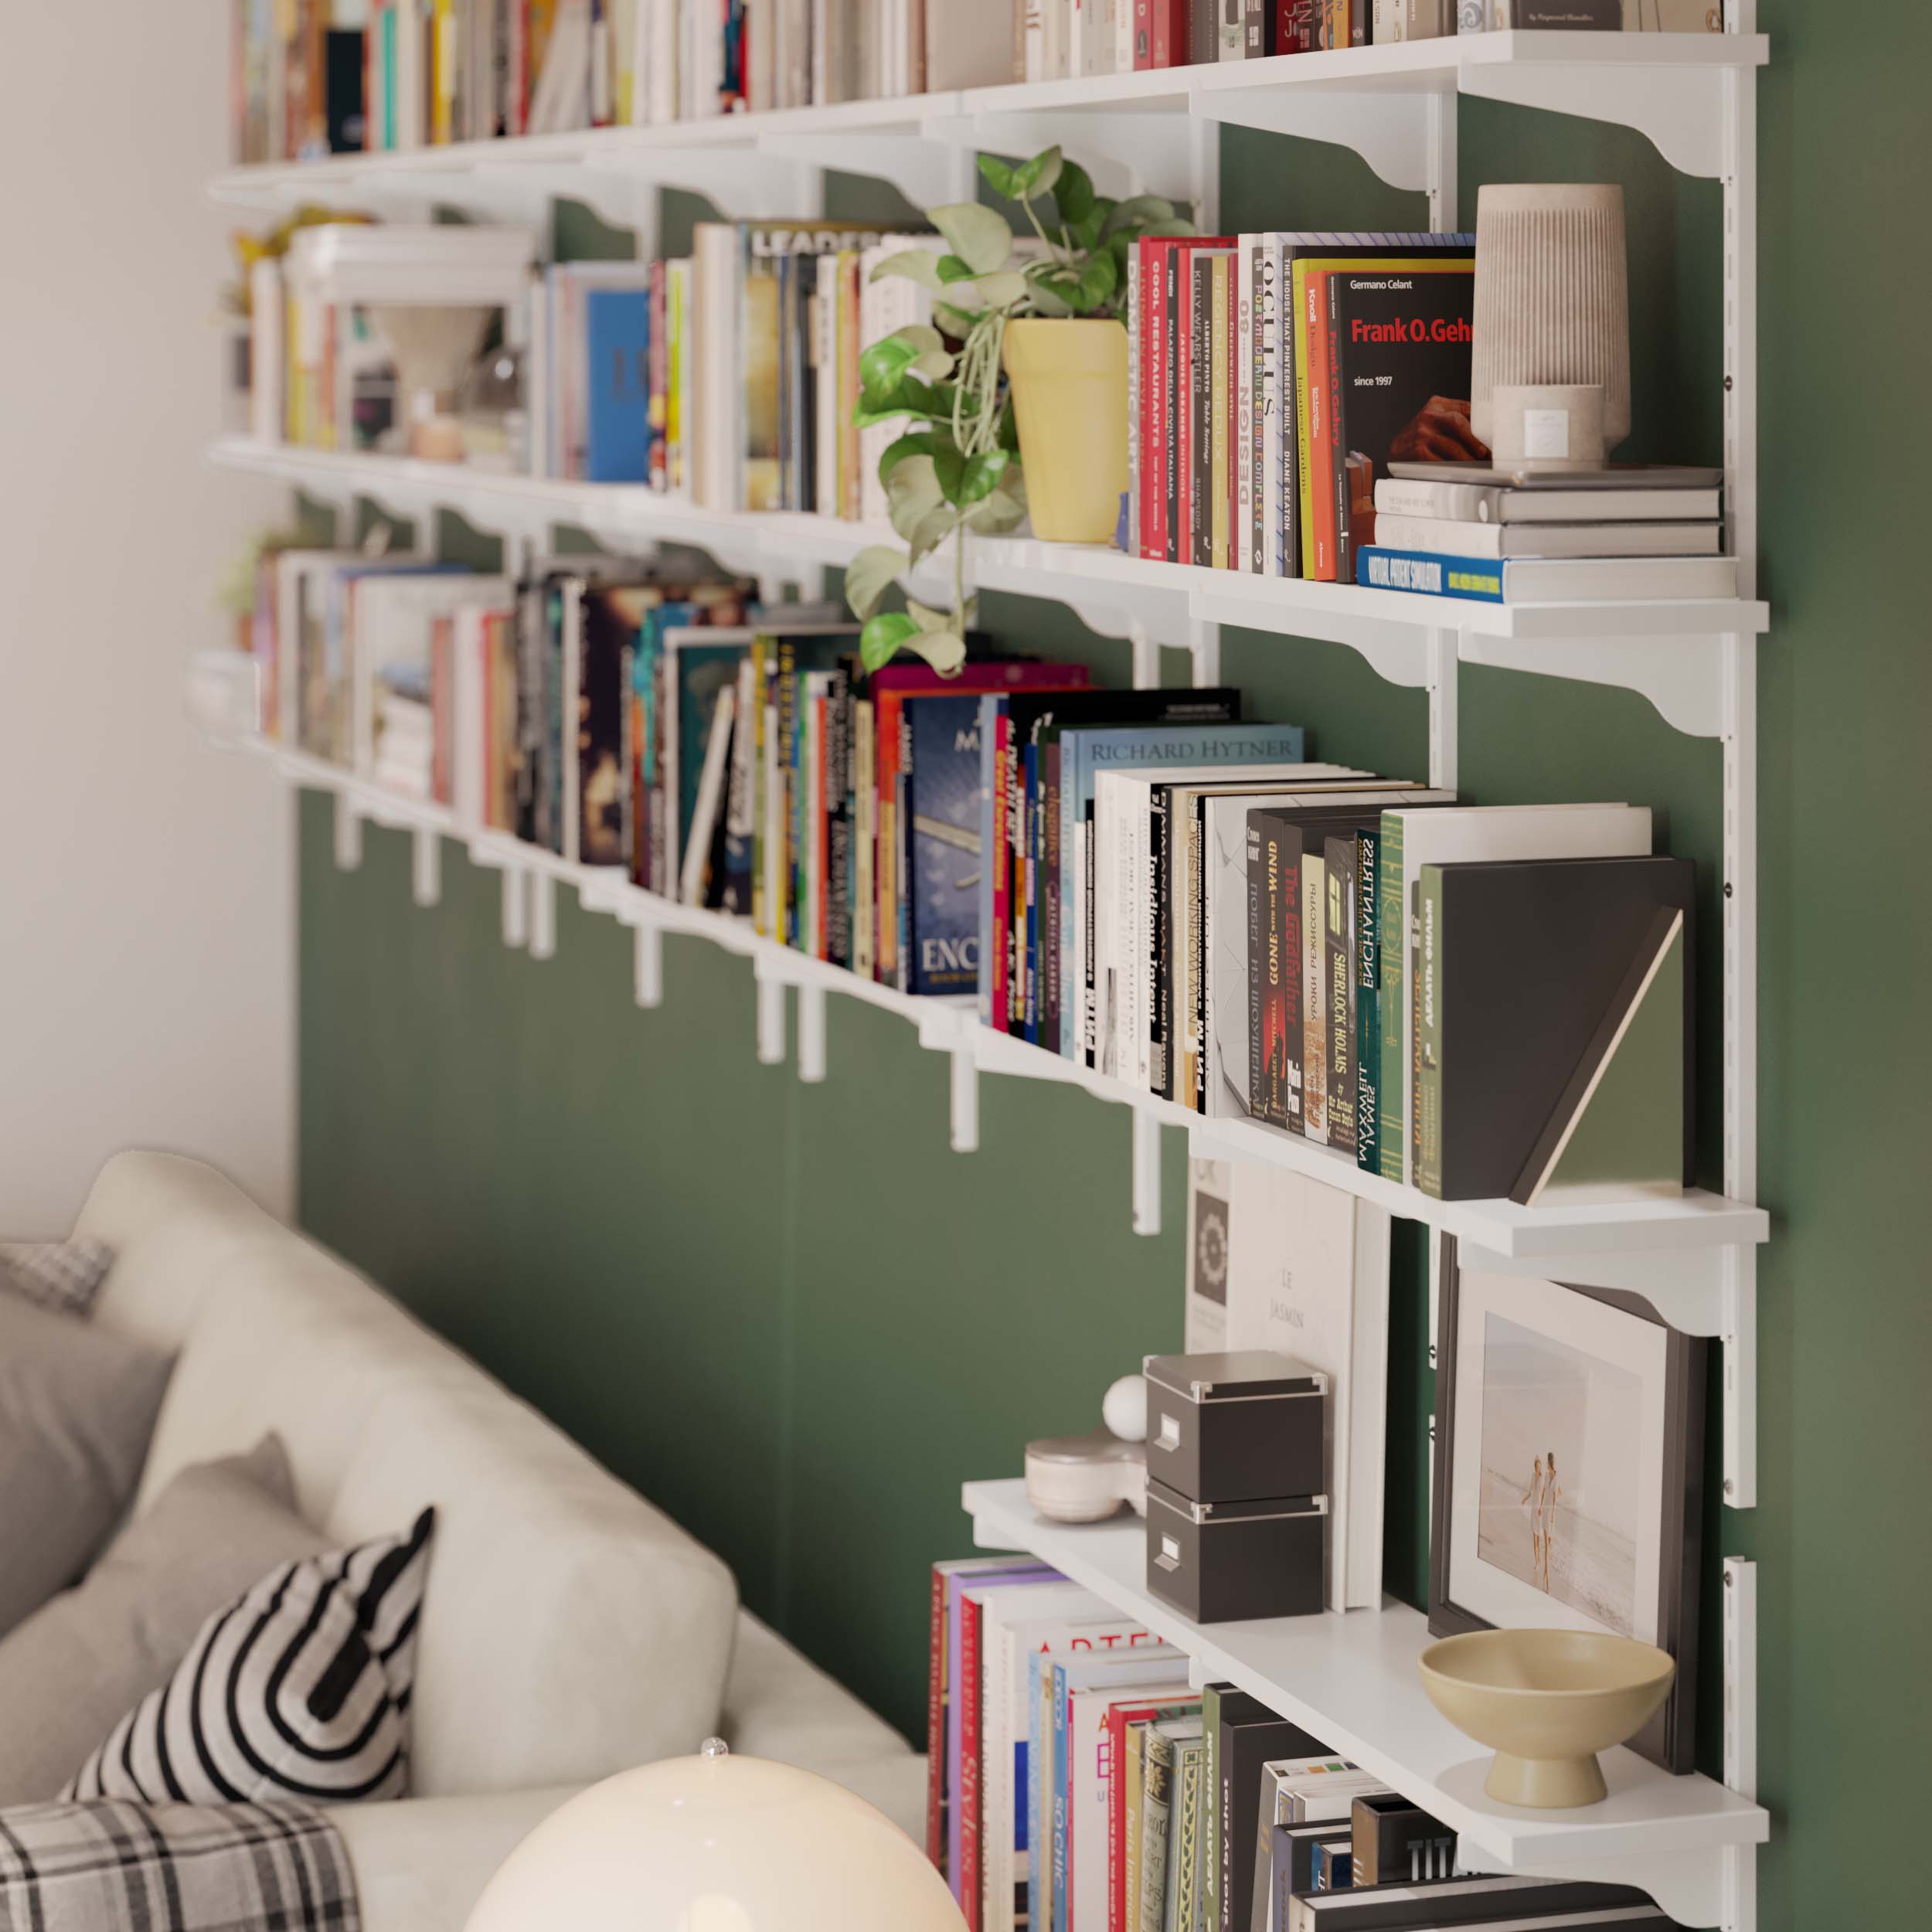 Living room with white wall bookshelves filled with a variety of colorful books.